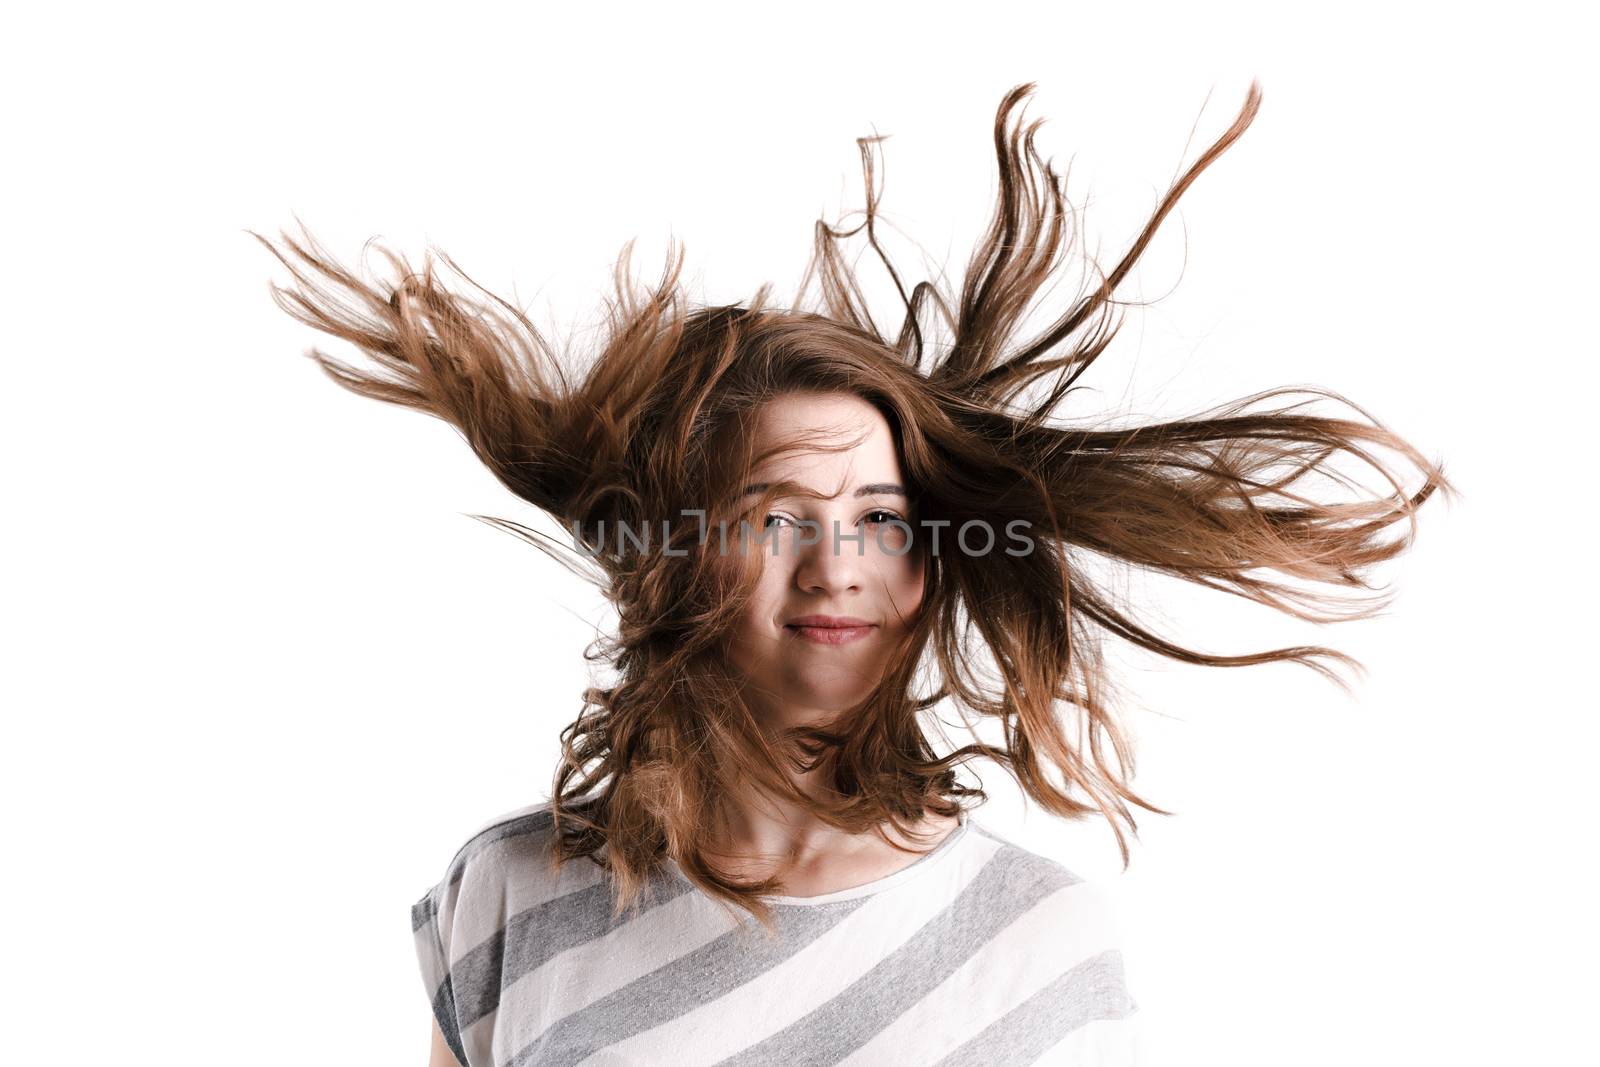 portrait of a beautiful girl with waving hair